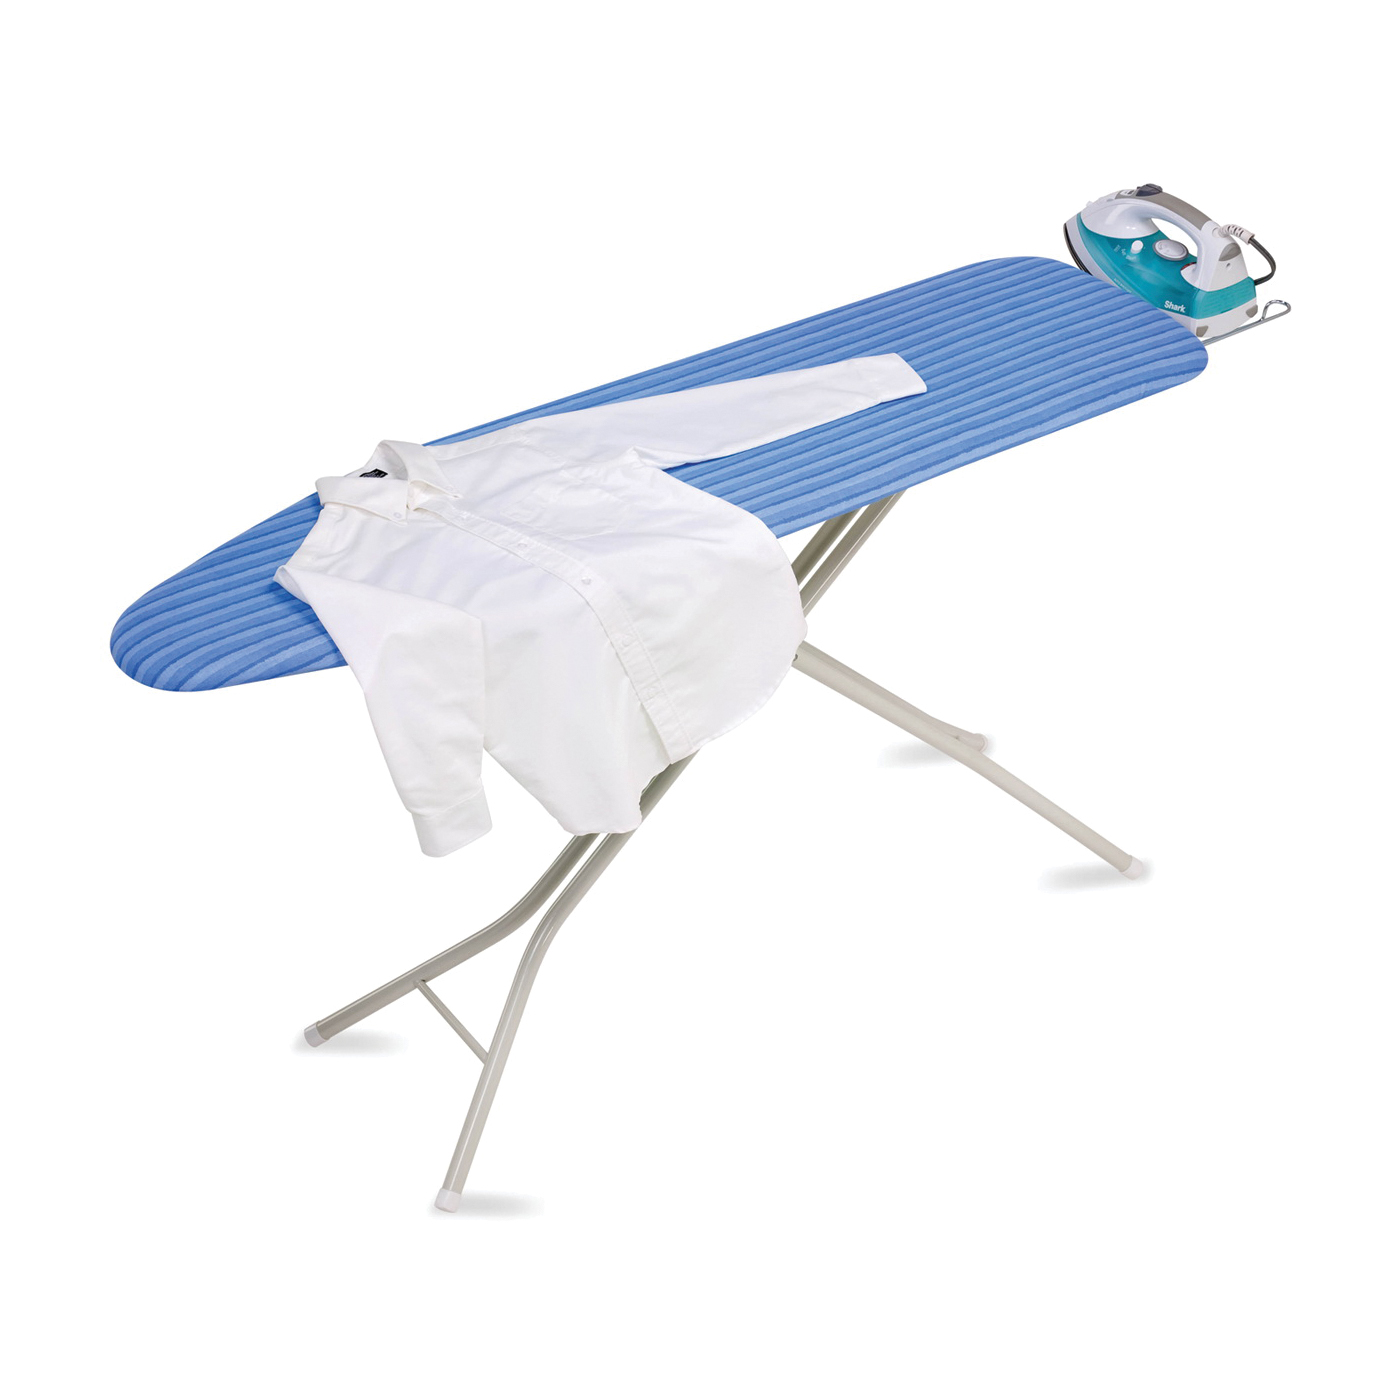 Honey-Can-Do BRD-01956 Ironing Board, Blue/White Board